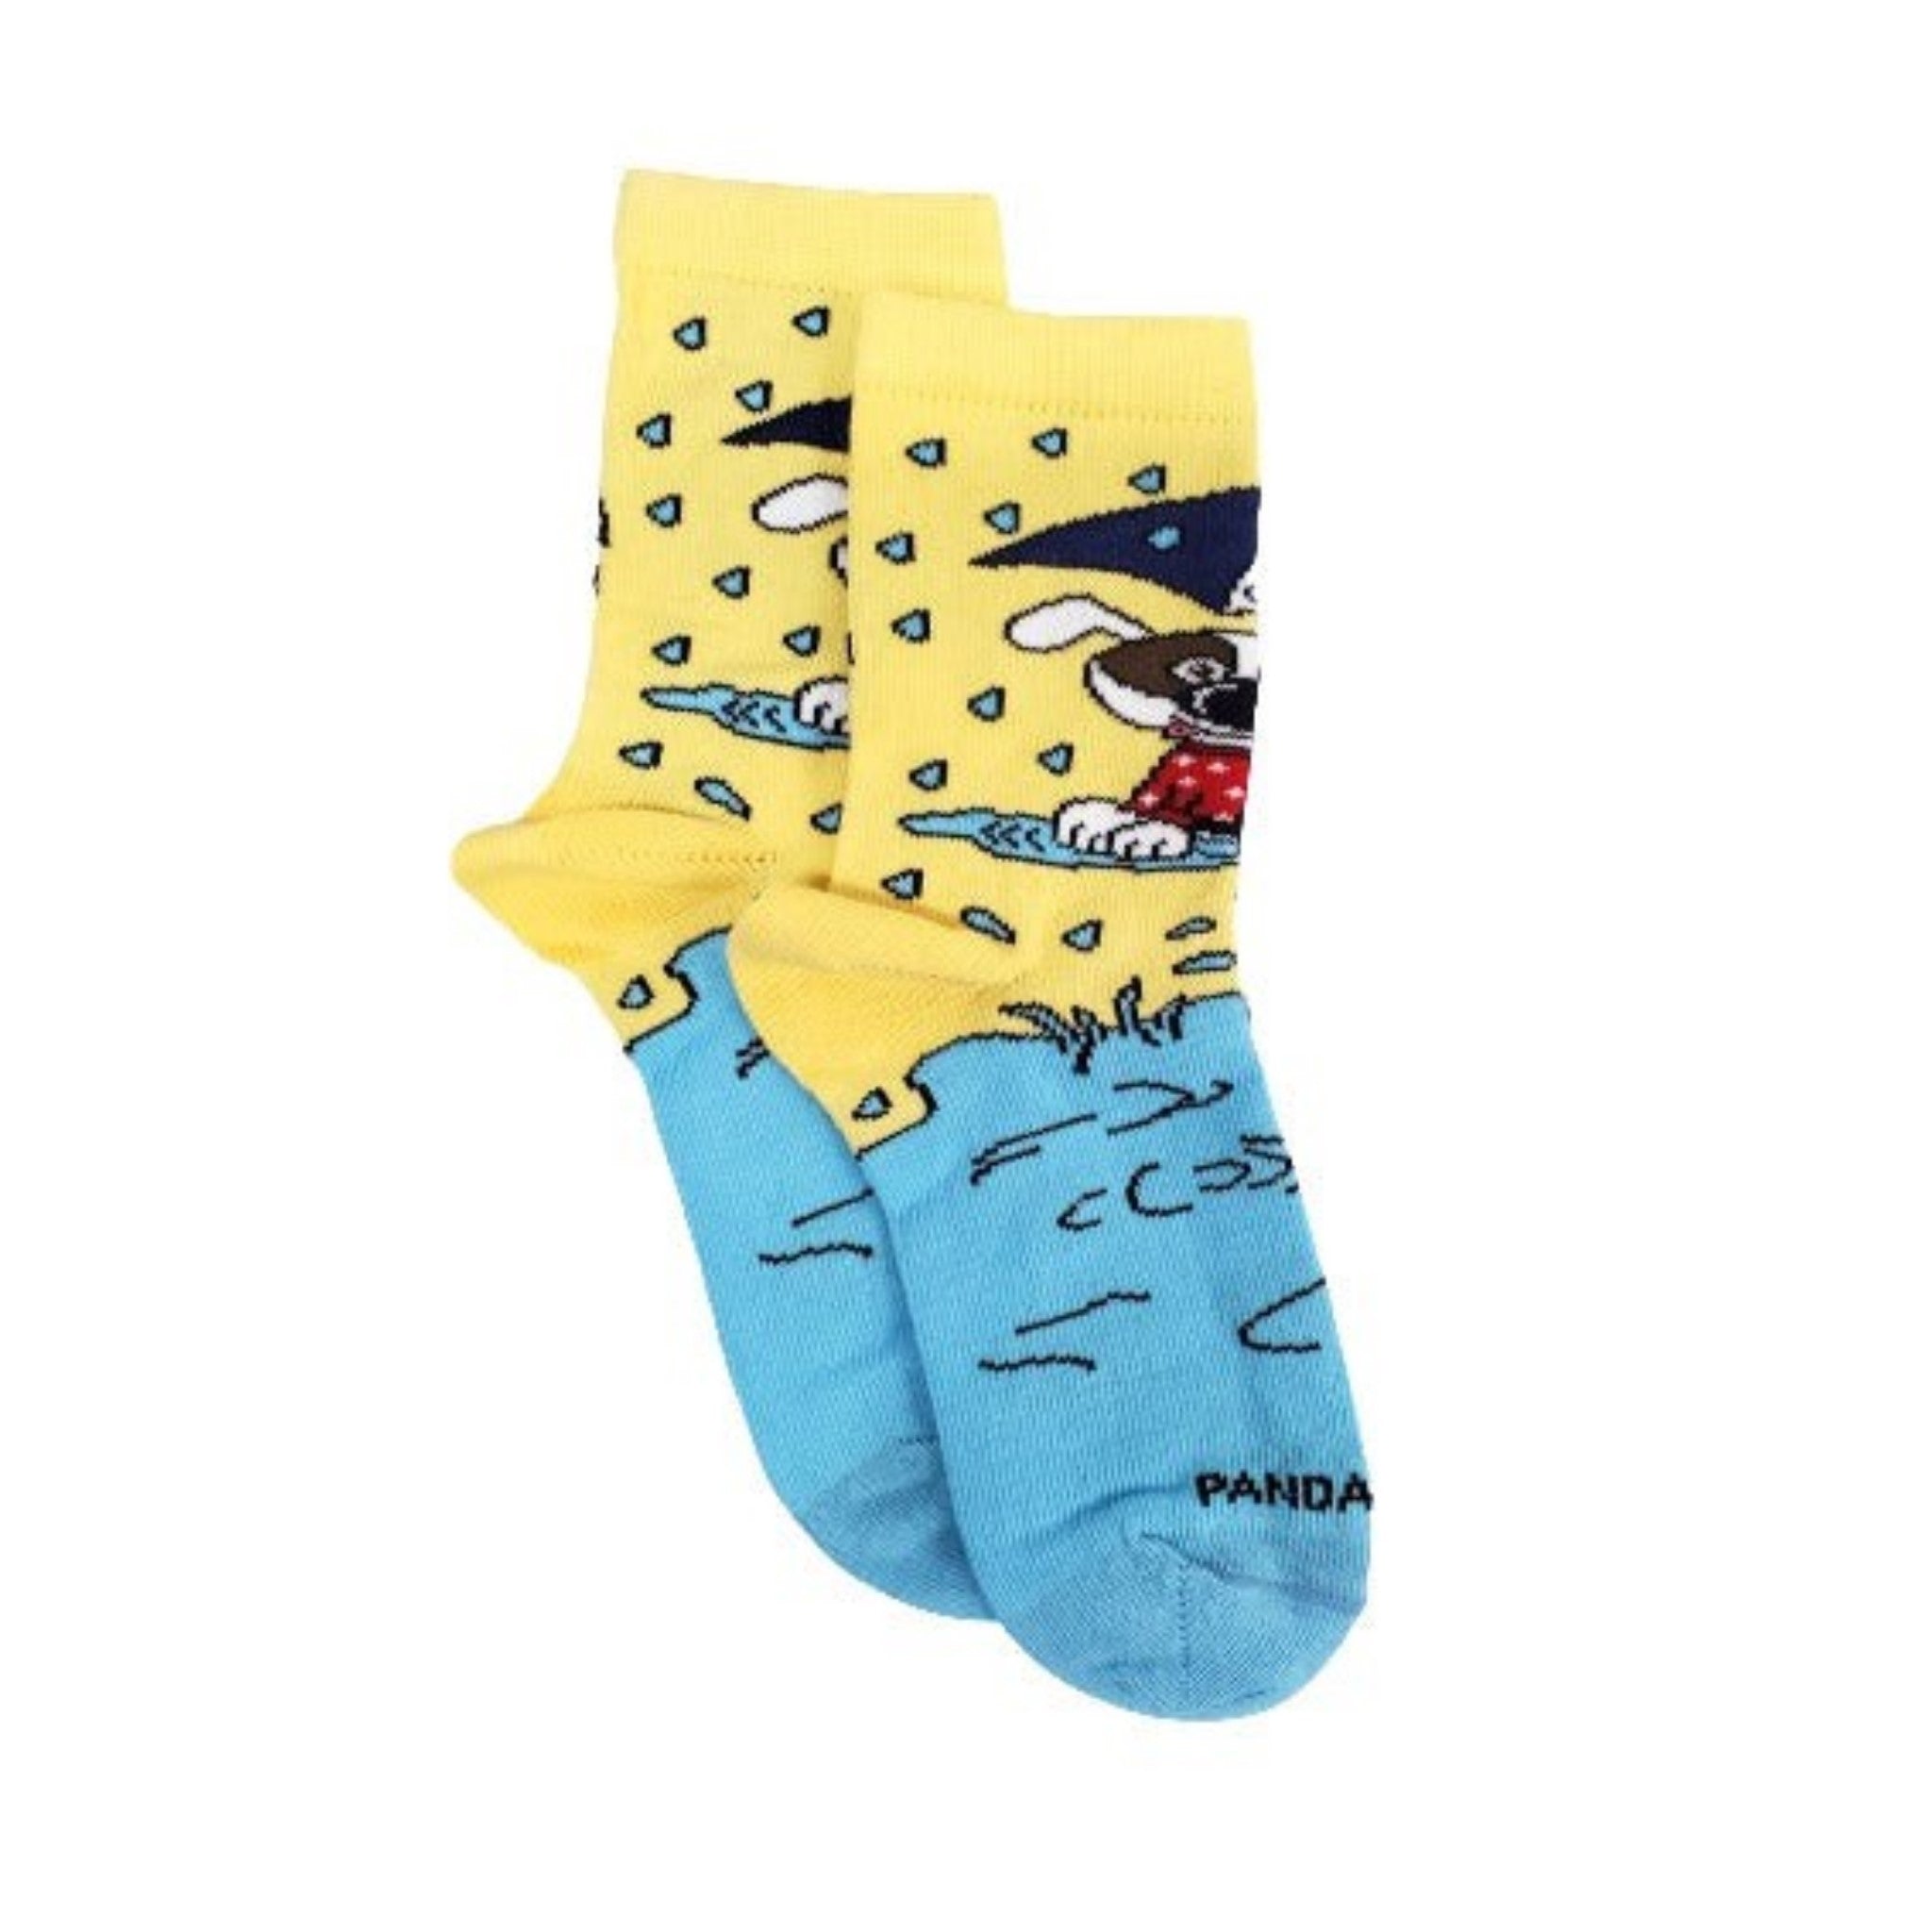 Fun Dog Socks Pack (Age 3-7) (Two Pairs)